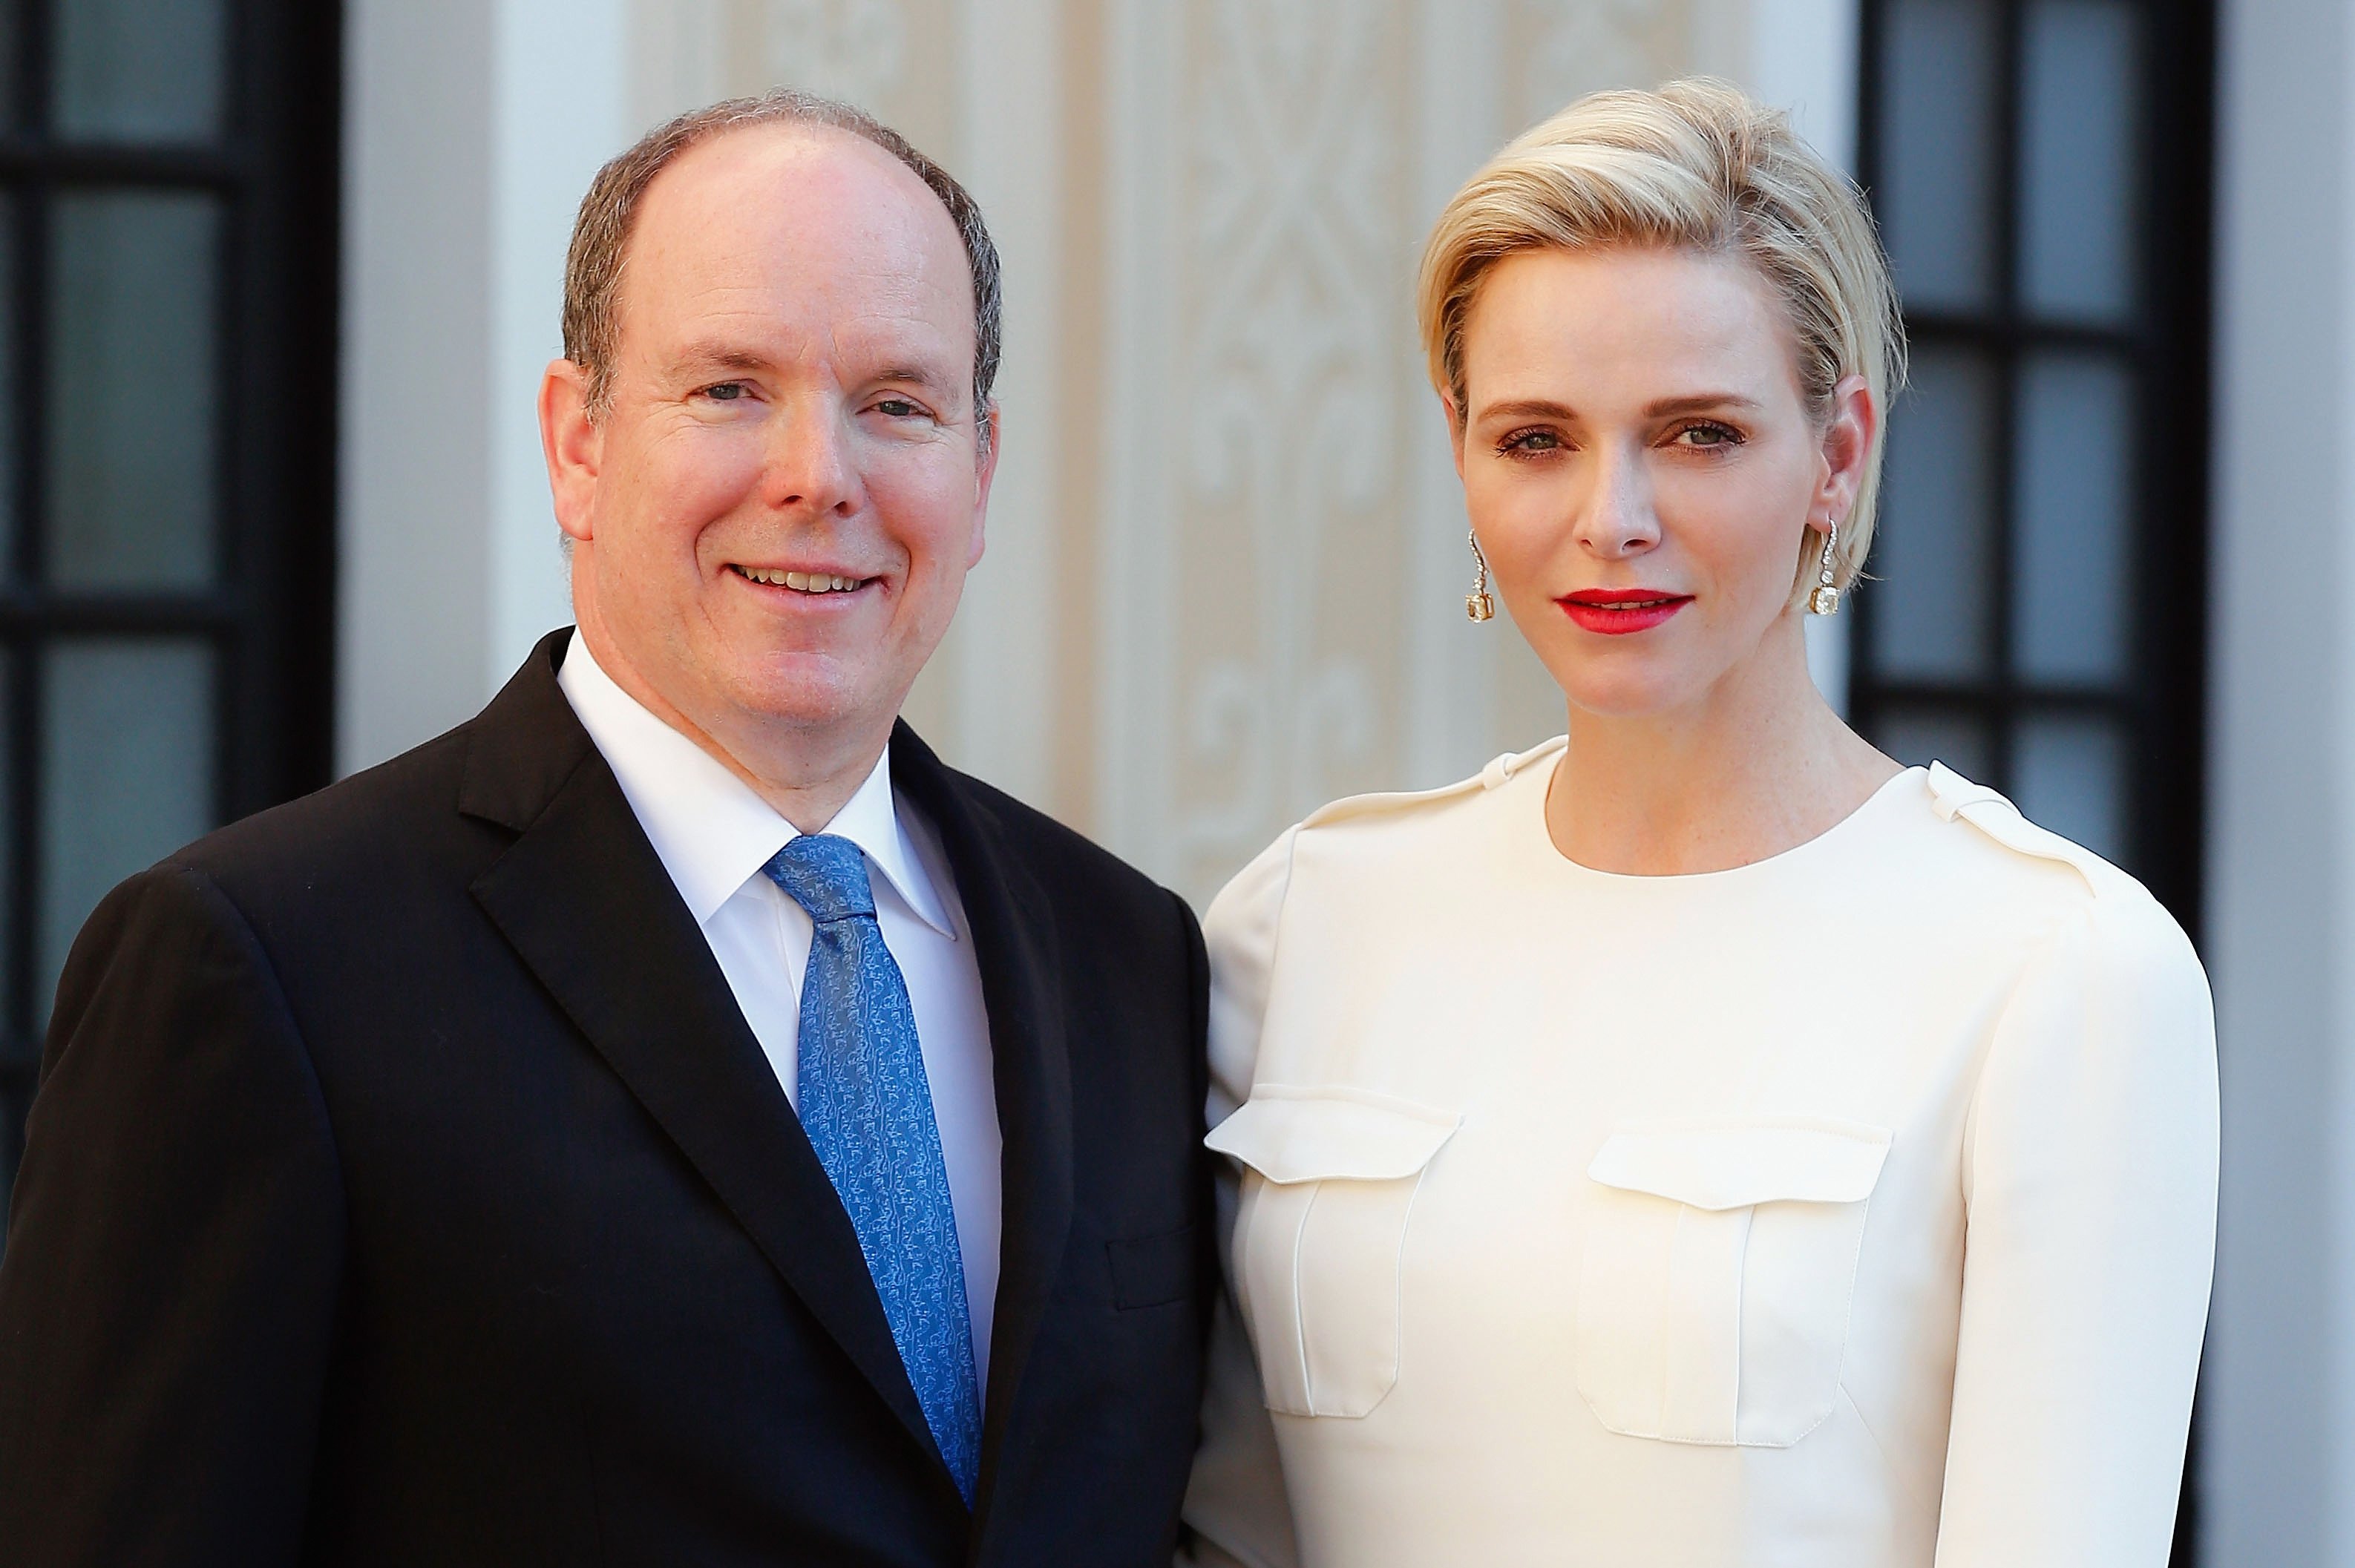 Prince Albert II of Monaco dressed in a suit and Princess Charlene of Monaco in a white outfit at Monaco Palace cocktail party